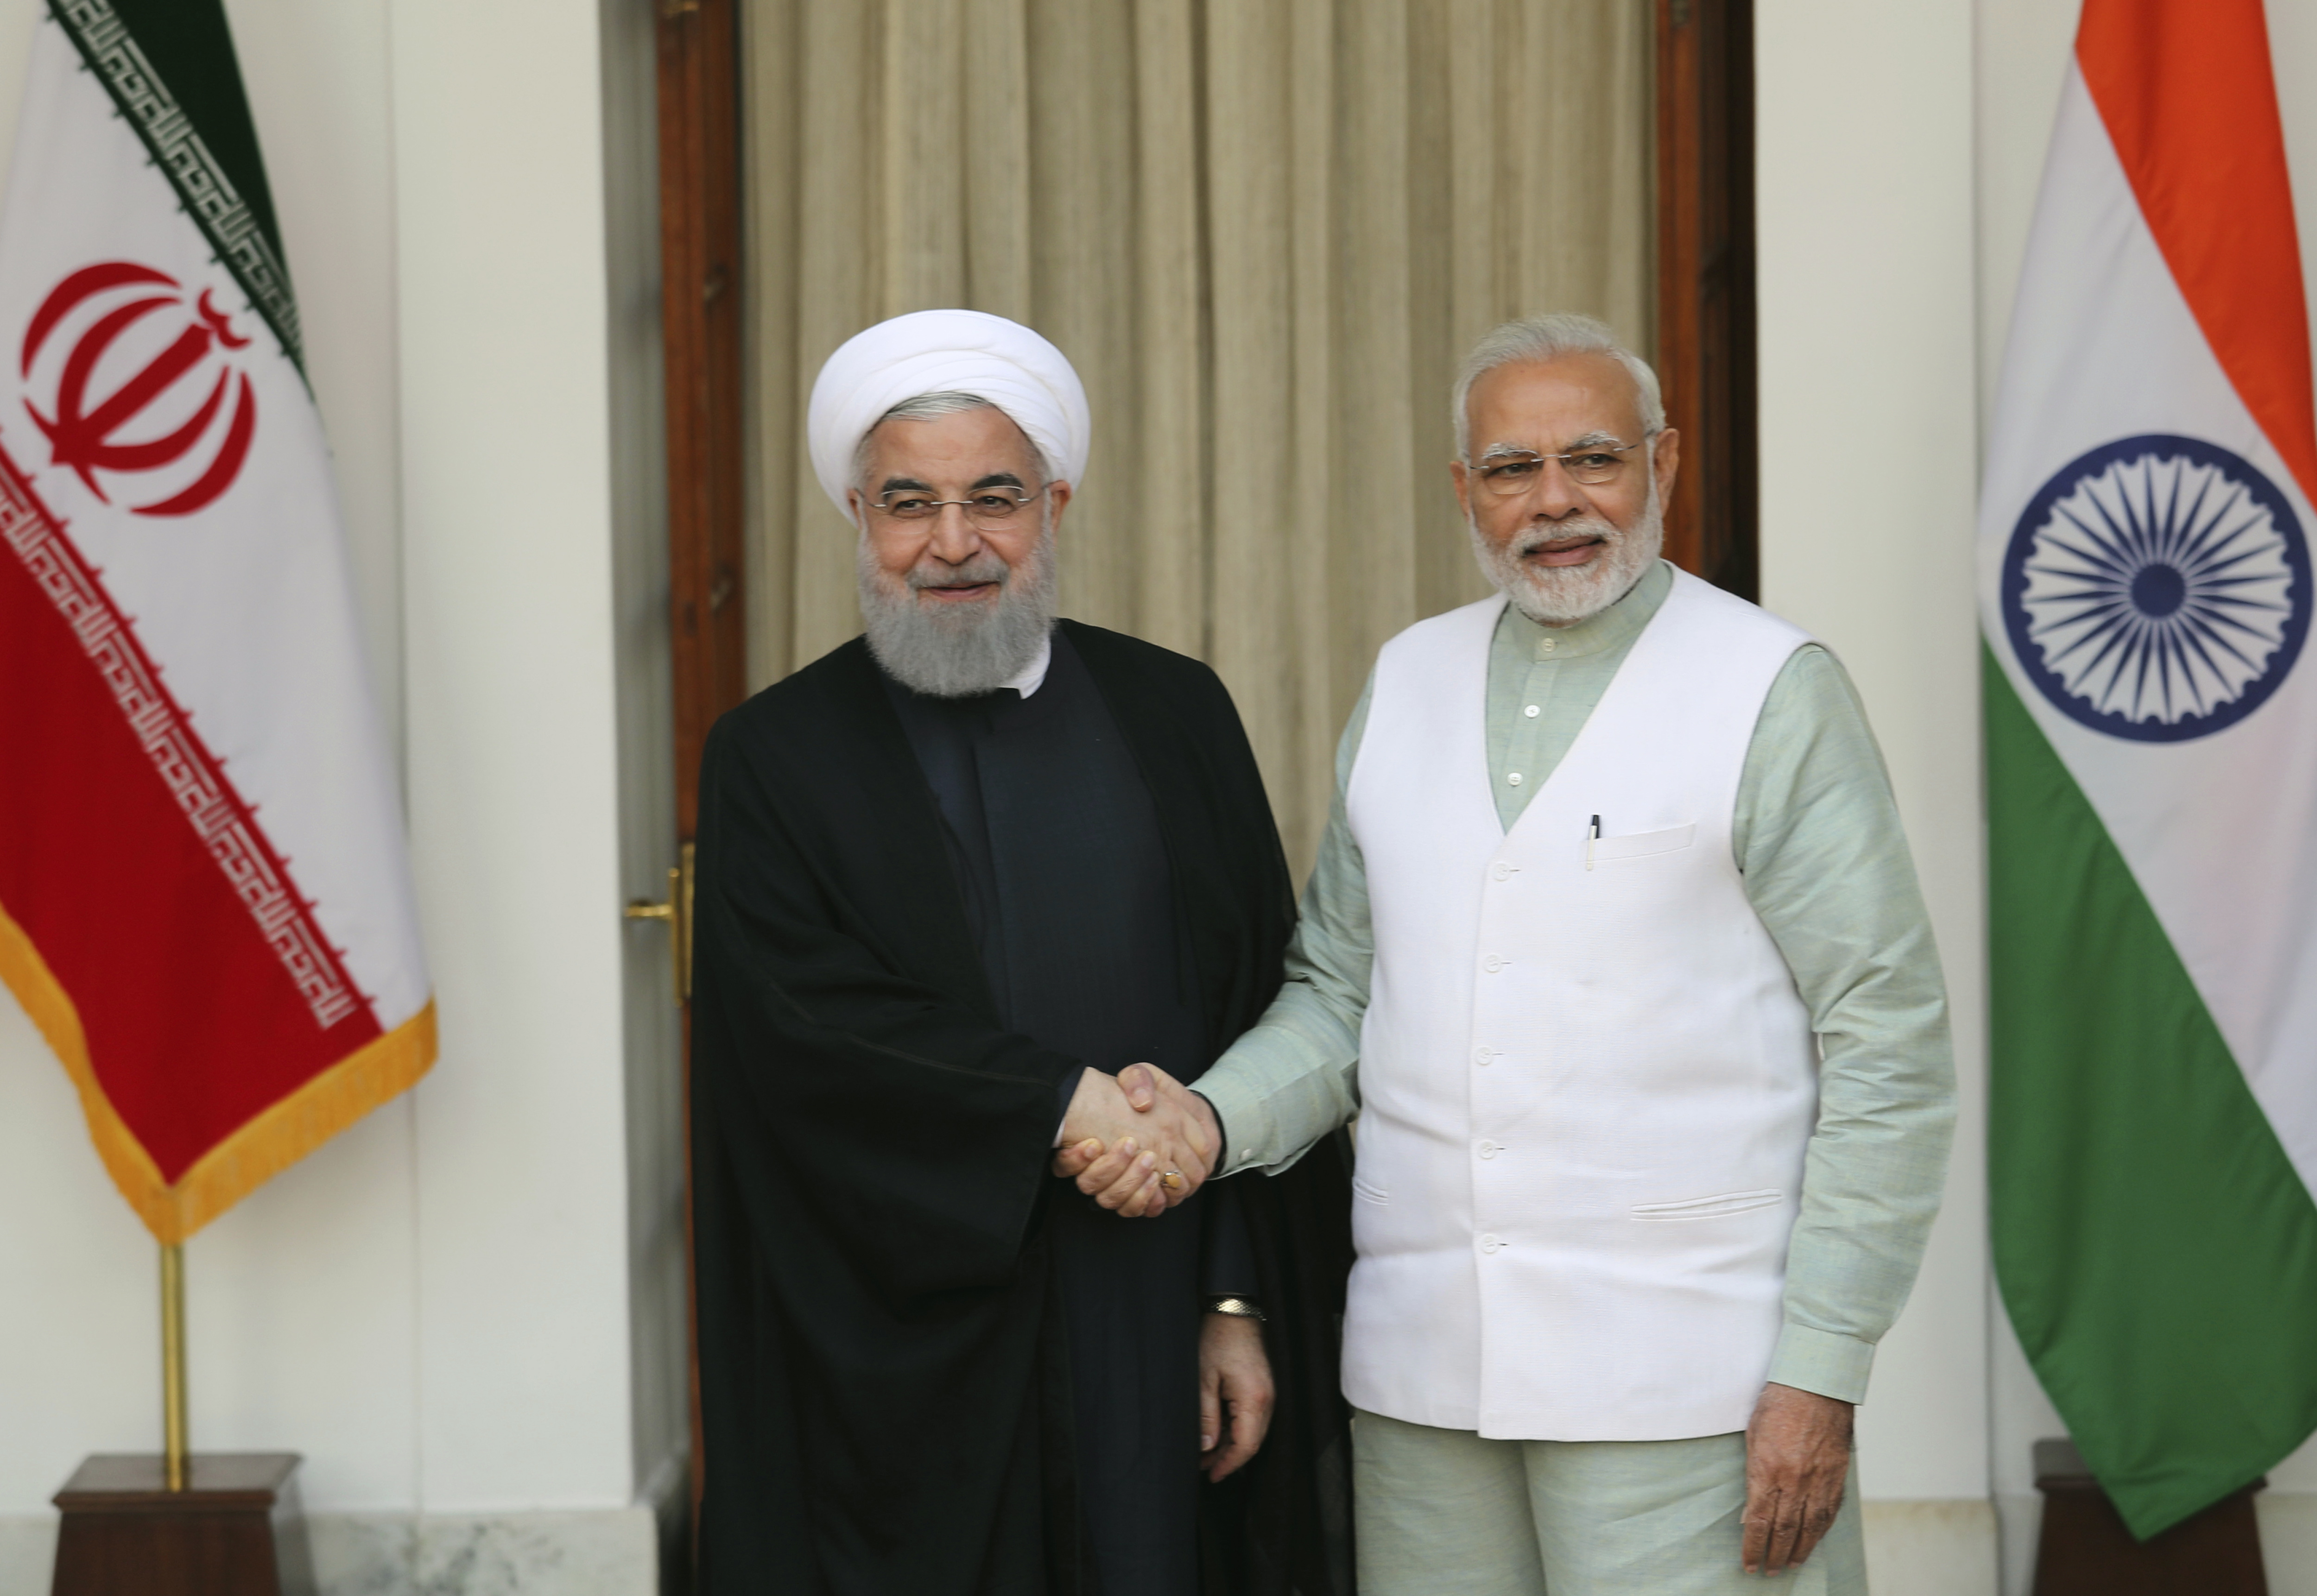 Indian Prime Minister Narendra Modi, right, shakes hand with Iranian President Hassan Rouhani, before their delegation level meeting in New Delhi, India, Saturday, Feb. 17, 2018. Rouhani, who is on three days state visit to India has strongly criticized the Trump administration's recognition of Jerusalem as Israel's capital and urged Muslims to support the Palestinian cause. (AP Photo/Manish Swarup)